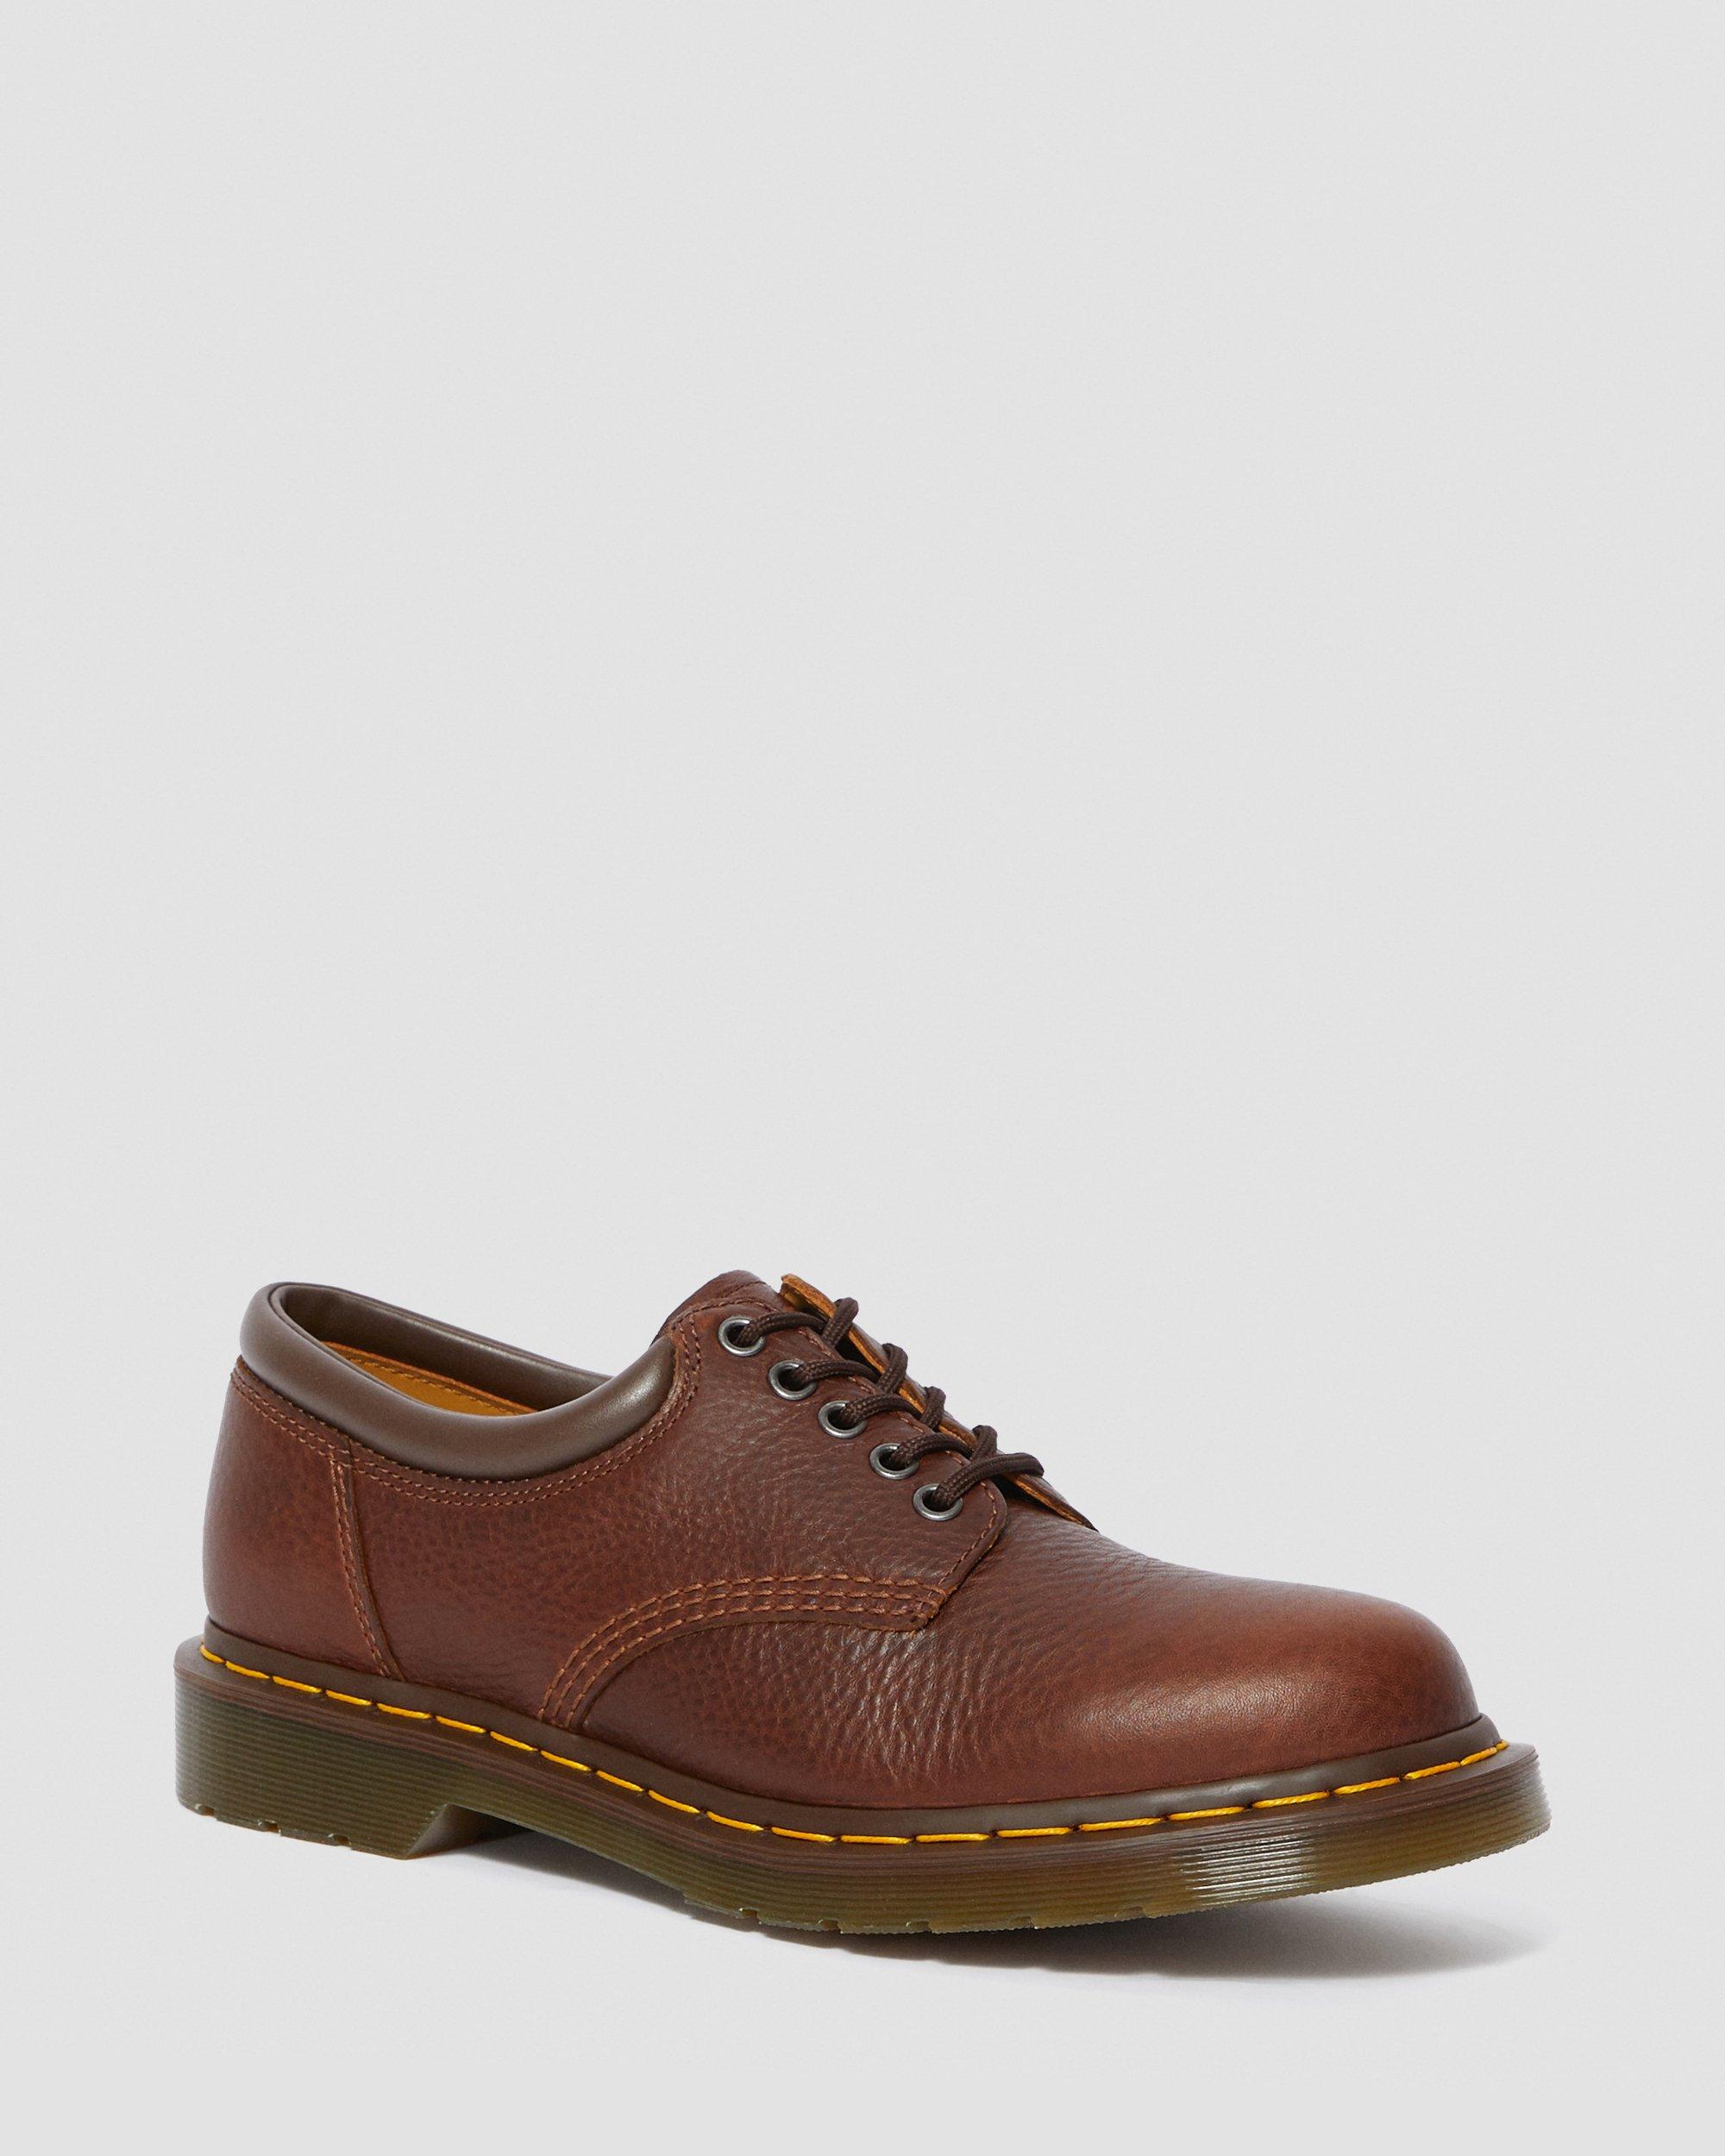 8053 HARVEST LEATHER CASUAL SHOES | Dr 